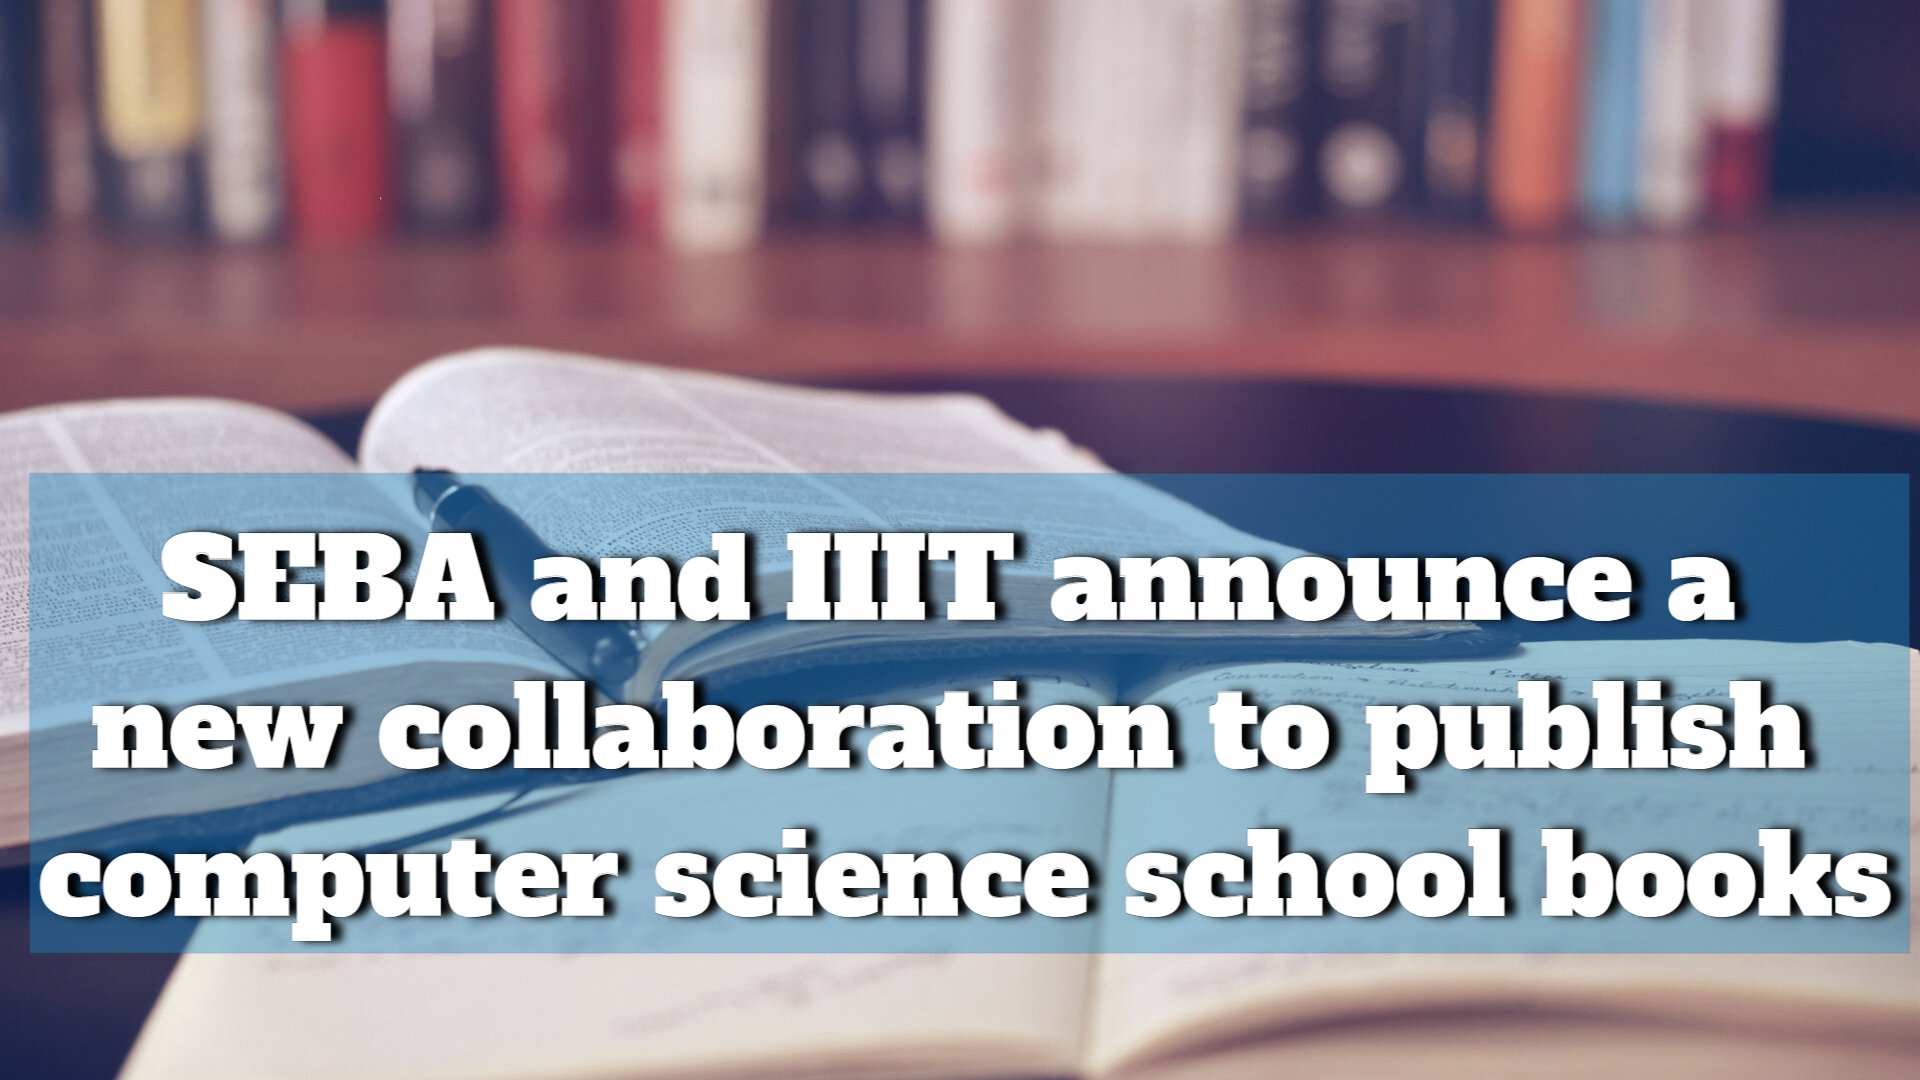 The SEBA and IIIT announce a collaboration to publish computer science school books